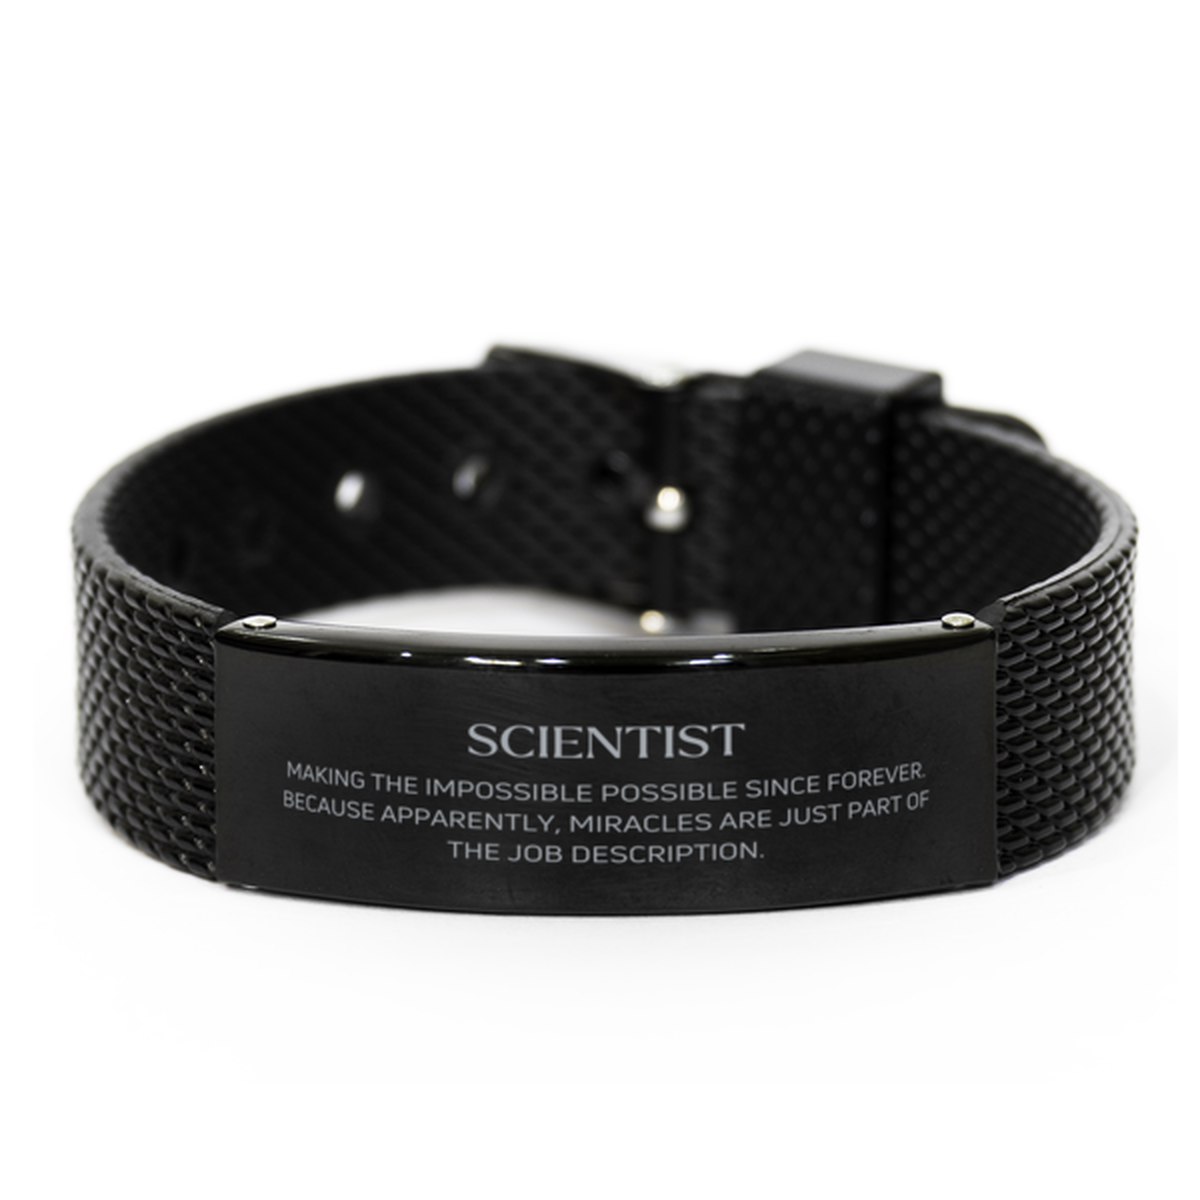 Funny Scientist Gifts, Miracles are just part of the job description, Inspirational Birthday Black Shark Mesh Bracelet For Scientist, Men, Women, Coworkers, Friends, Boss